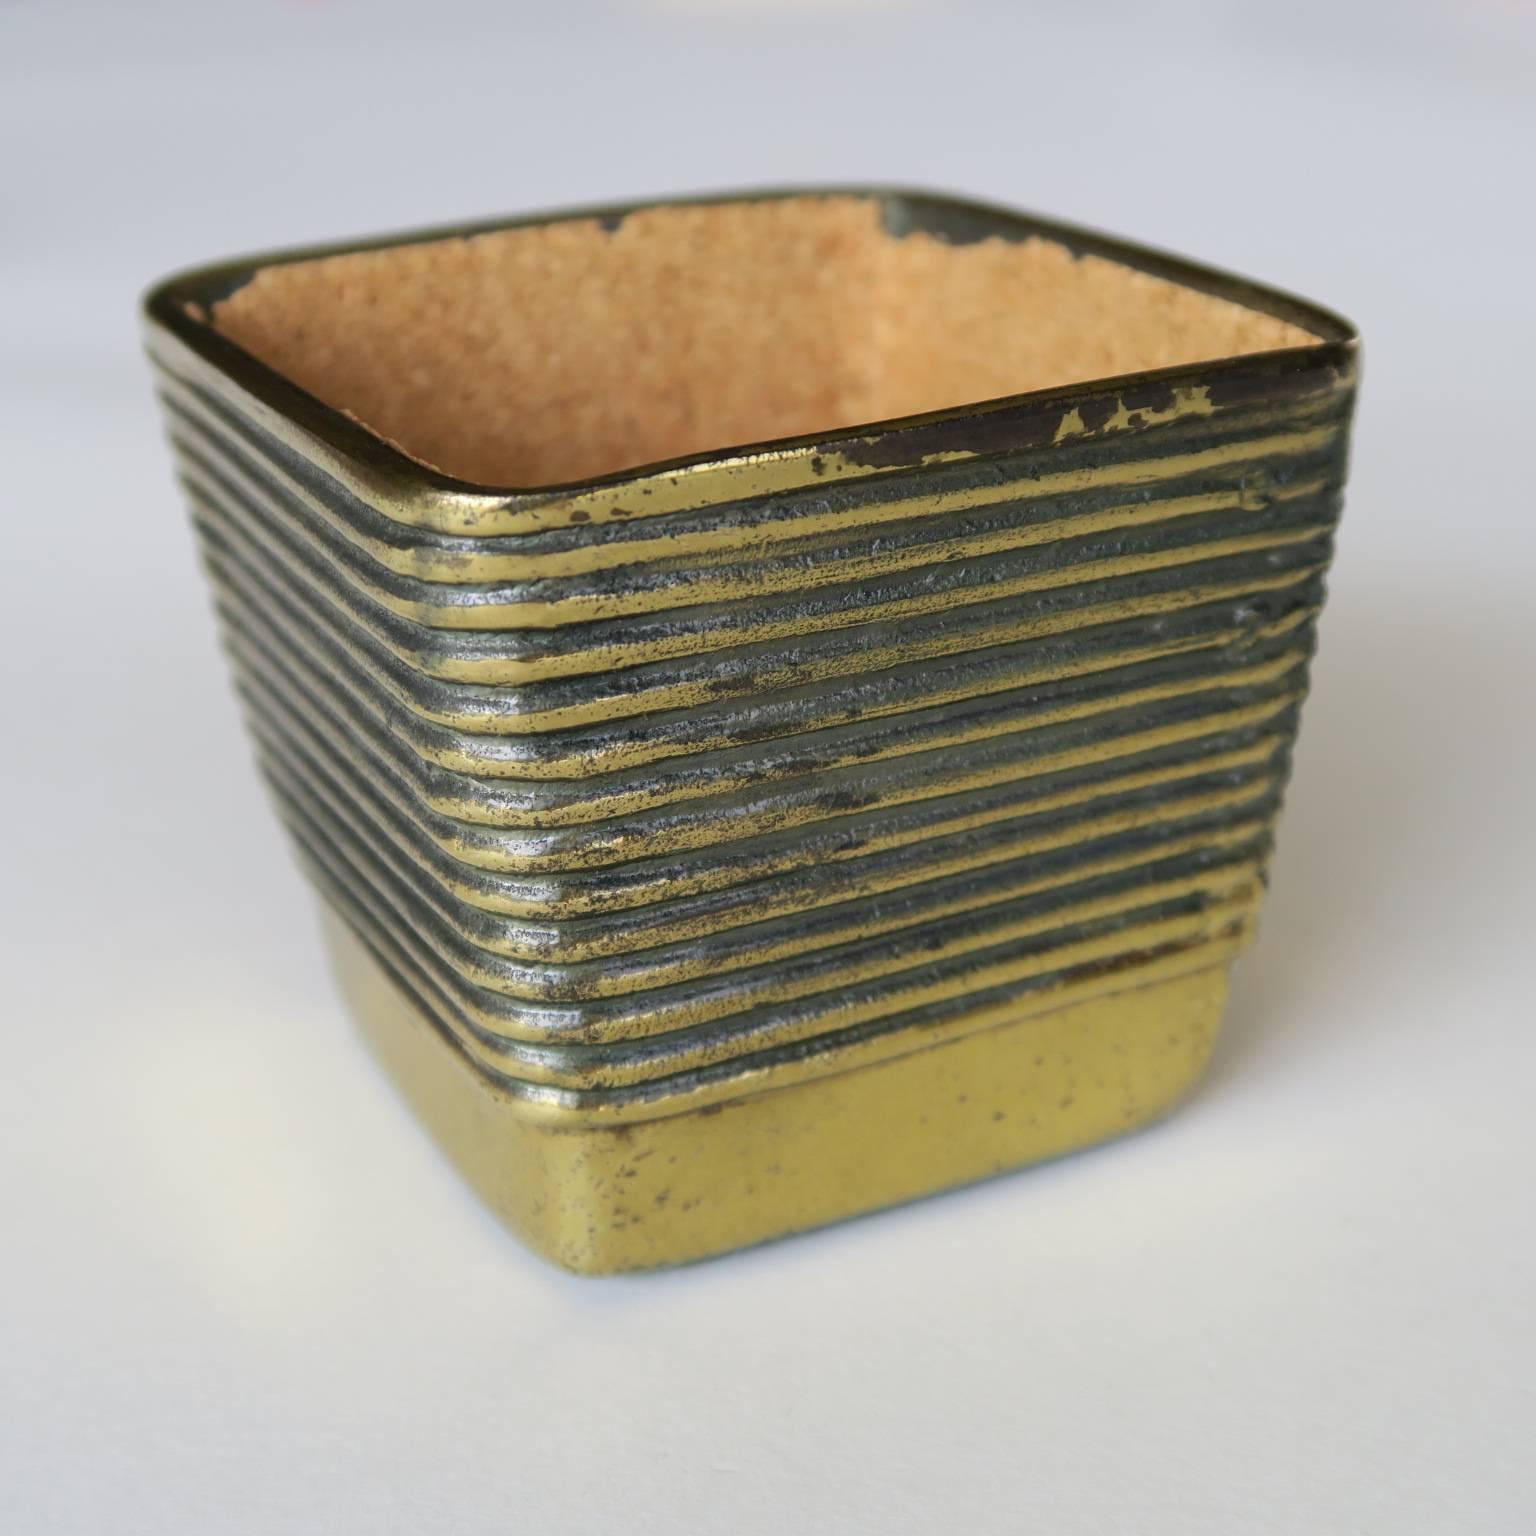 Ben Seibel cup, brass-plated cast metal, cork lined interior, 1950s. Measures: 2 3/8 high x 2 1/8 x 2 1/8 inches.